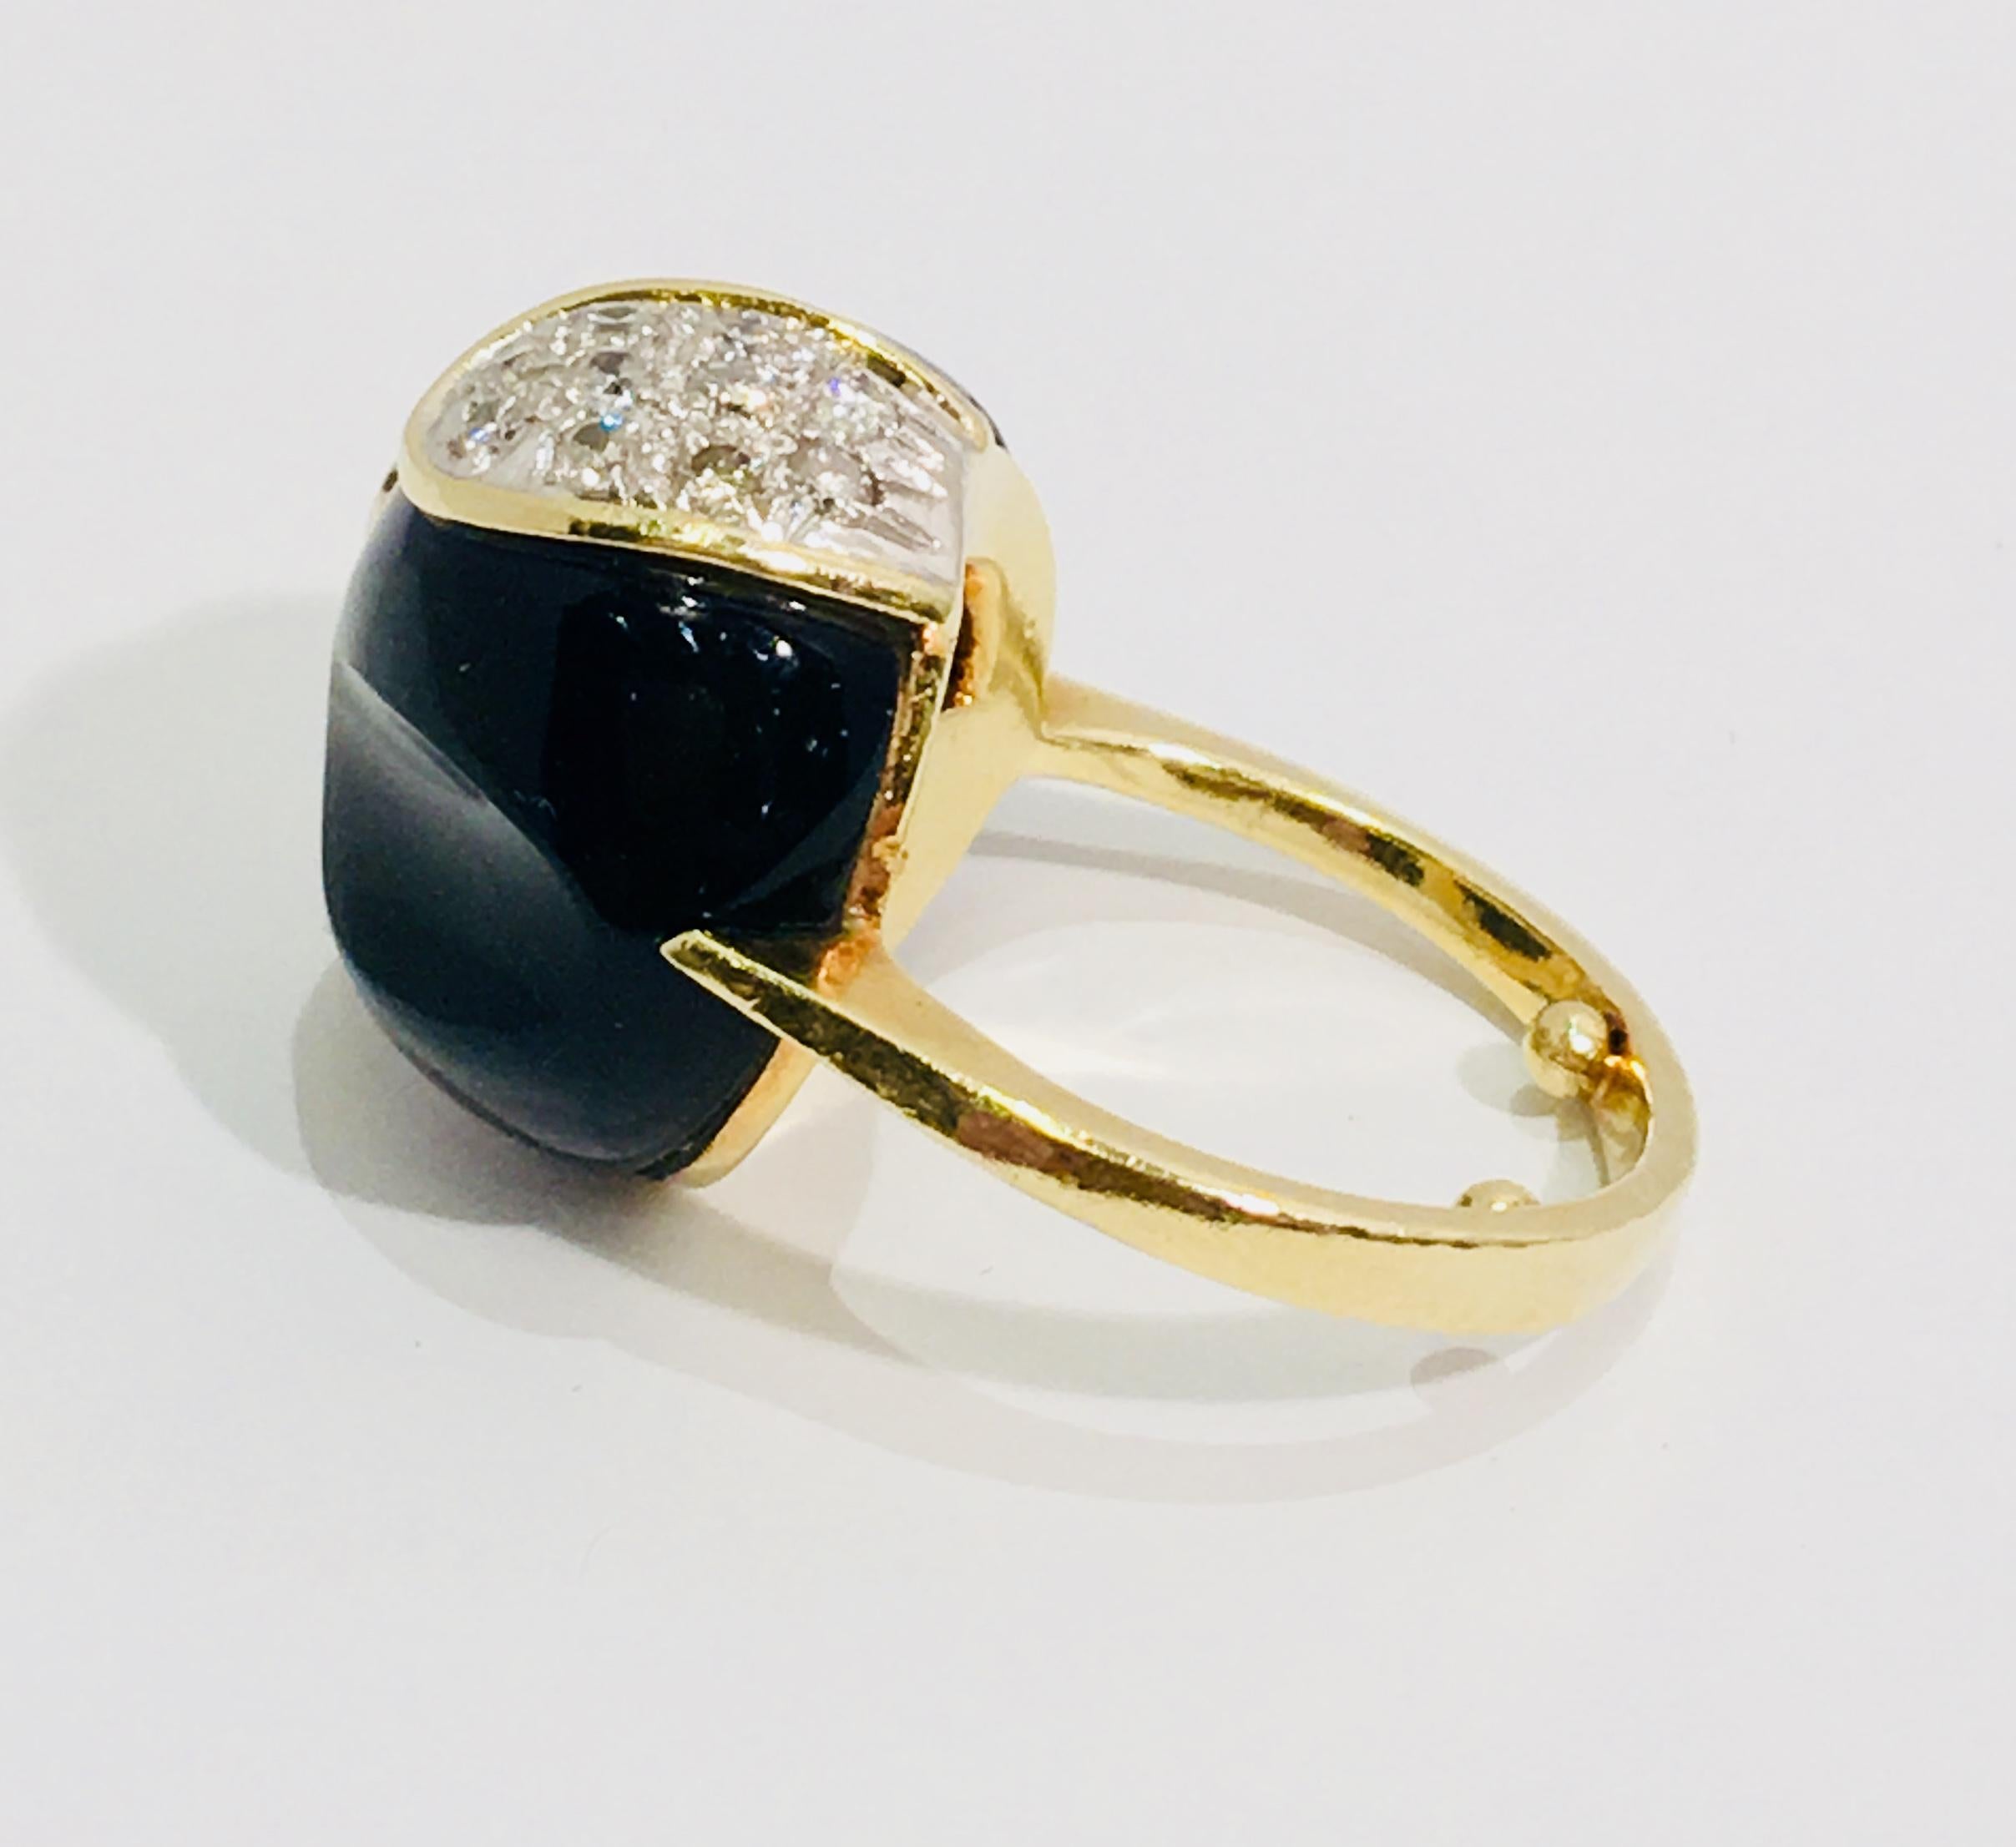 Women's Mid-Century Modern Carved Black Onyx Diamond Pave and White Gold Dome Ring